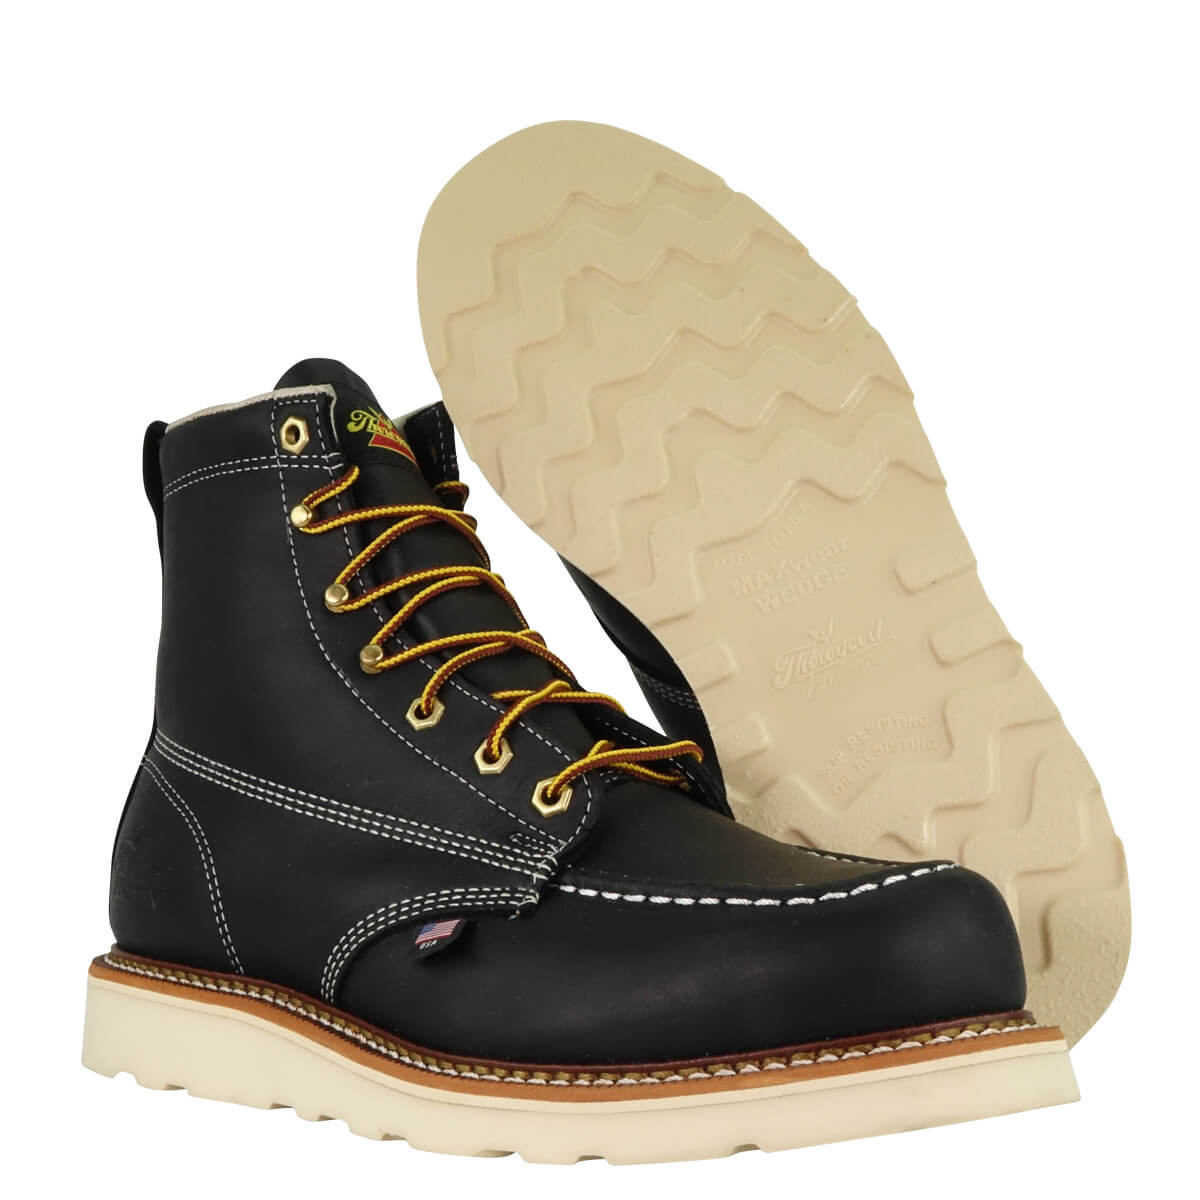 814-6201 6 inch BLACK Moccassin TOE Wedge outsole work boot (Black)